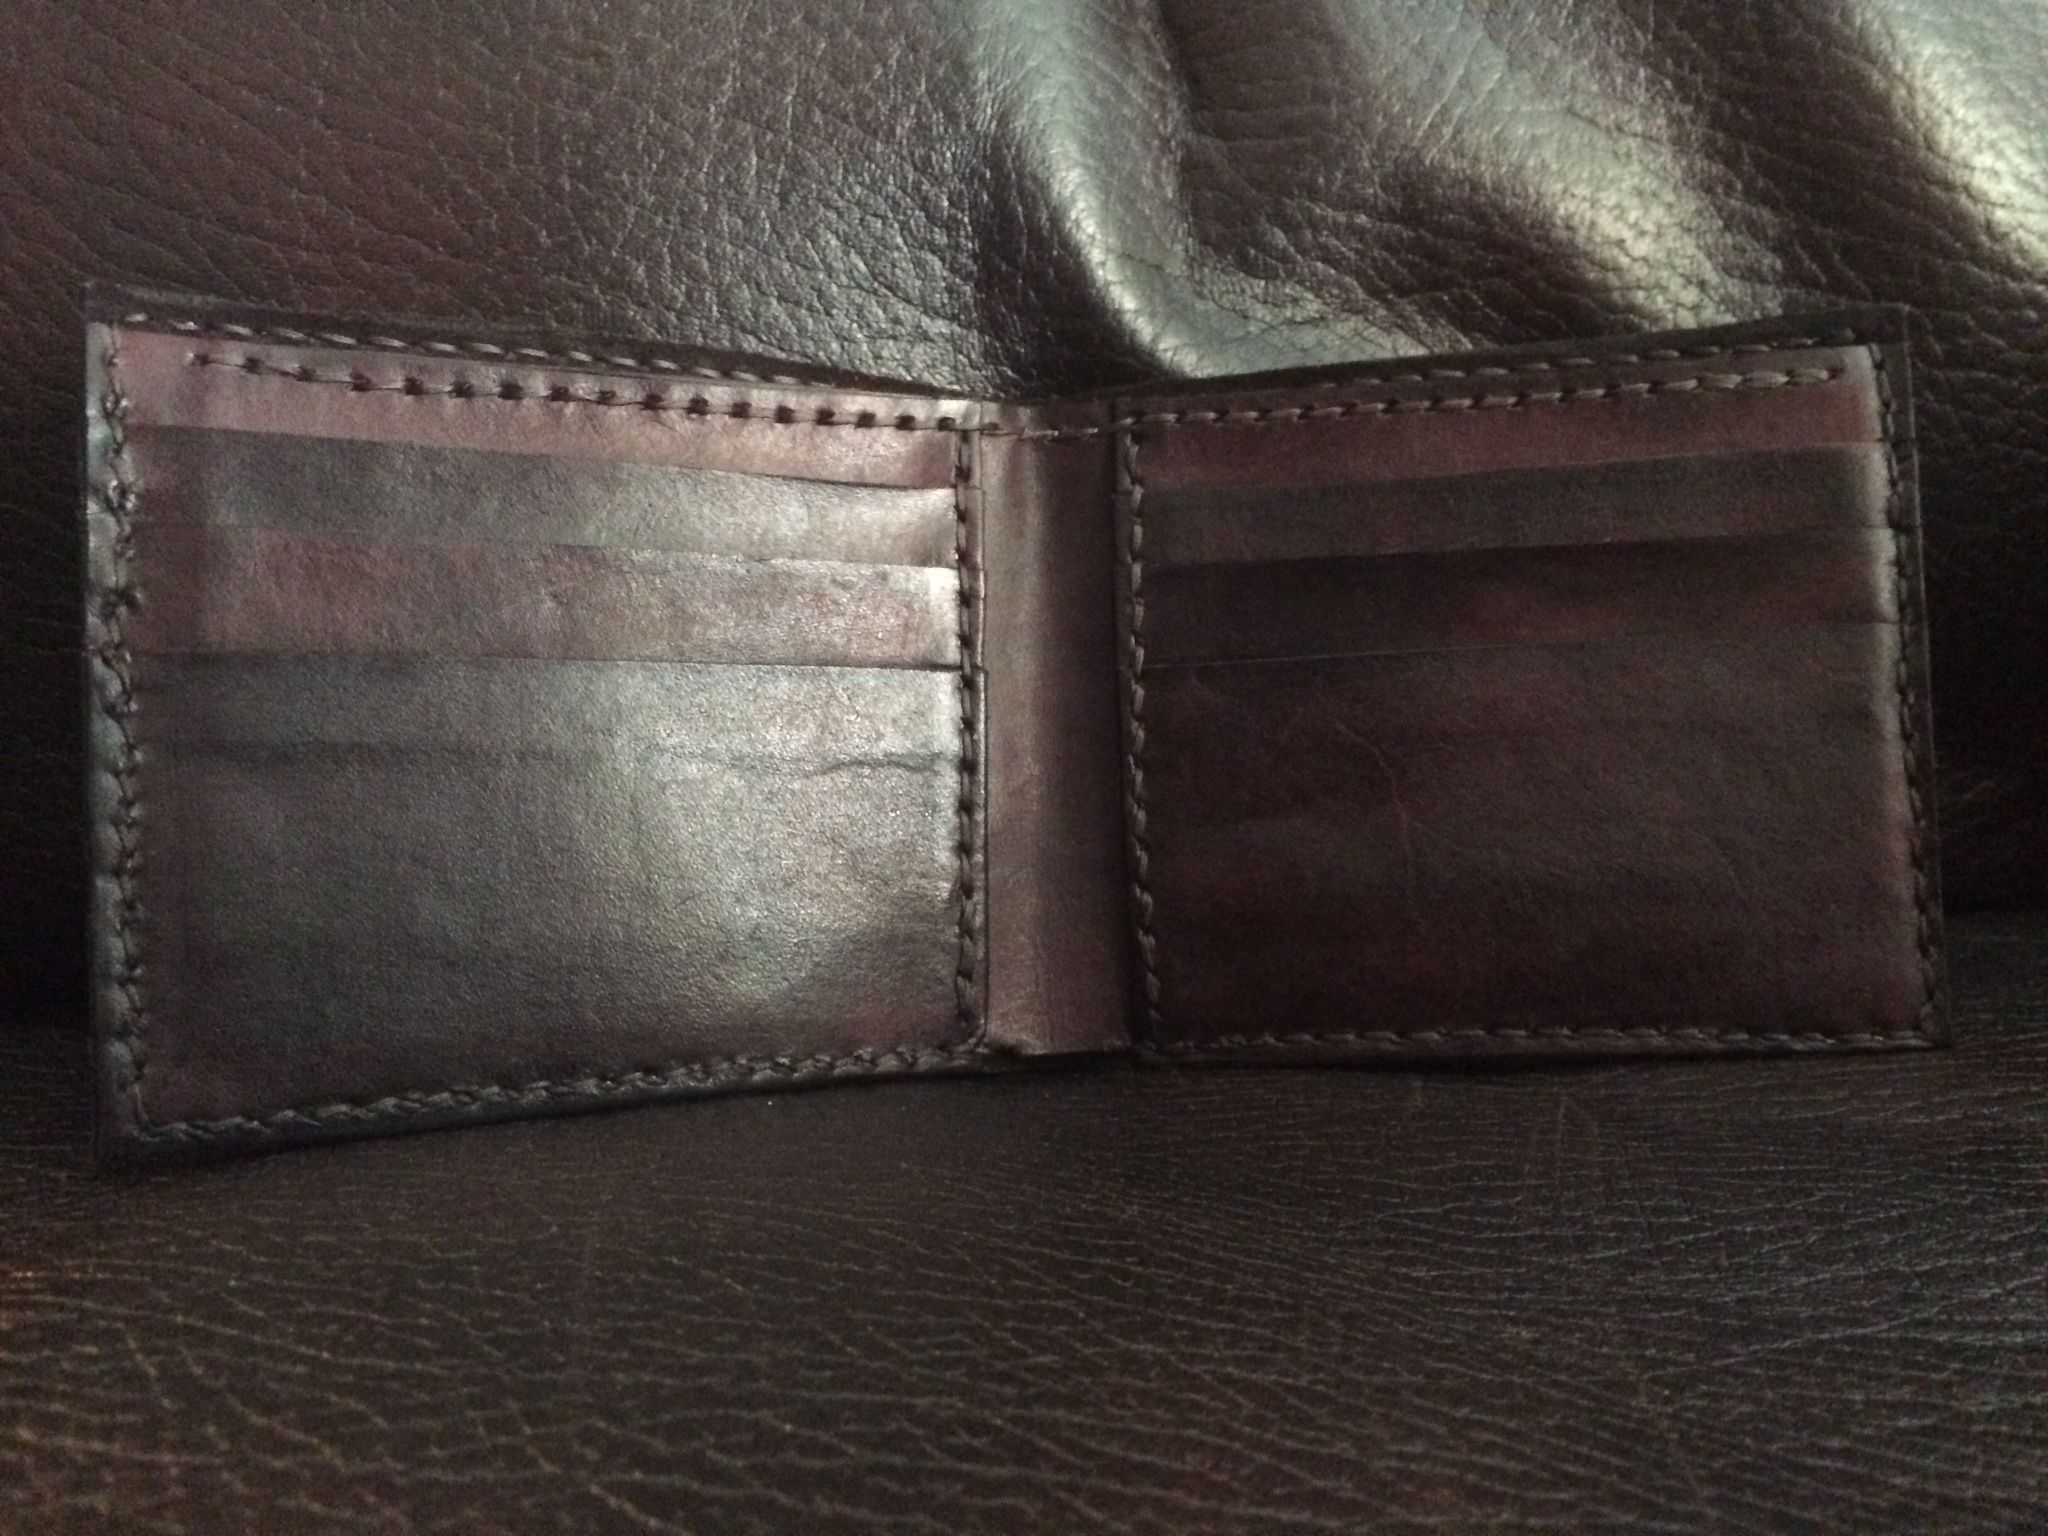 Buy a Custom Mens Leather Dress Wallet With Outside Coin/Card Pocket, made to order from Saxon ...